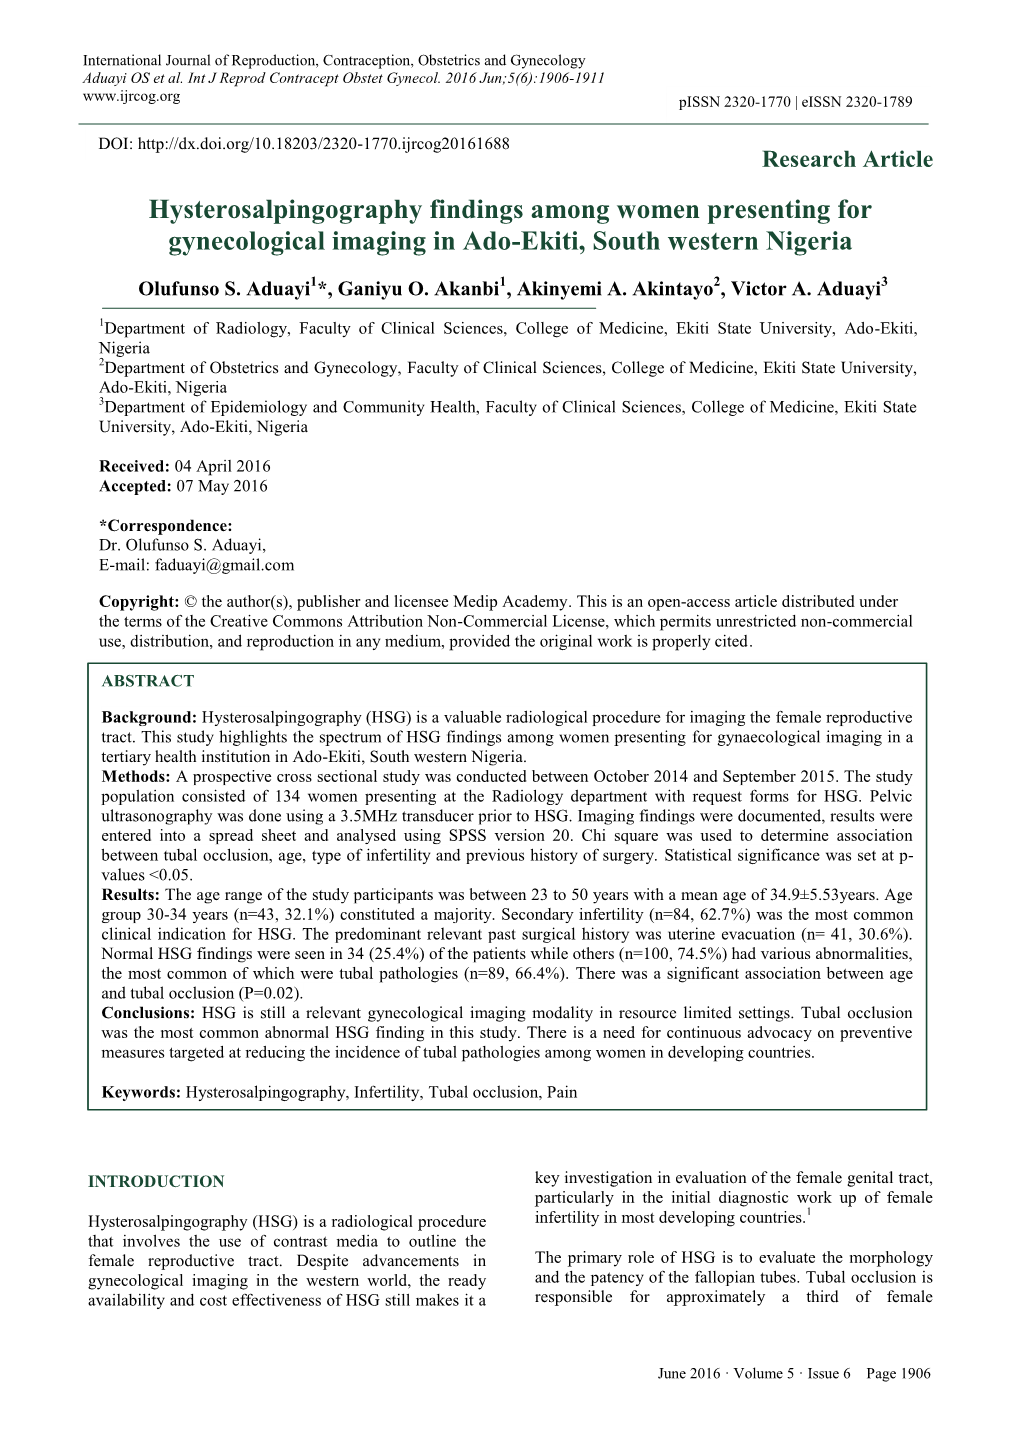 Hysterosalpingography Findings Among Women Presenting for Gynecological Imaging in Ado-Ekiti, South Western Nigeria